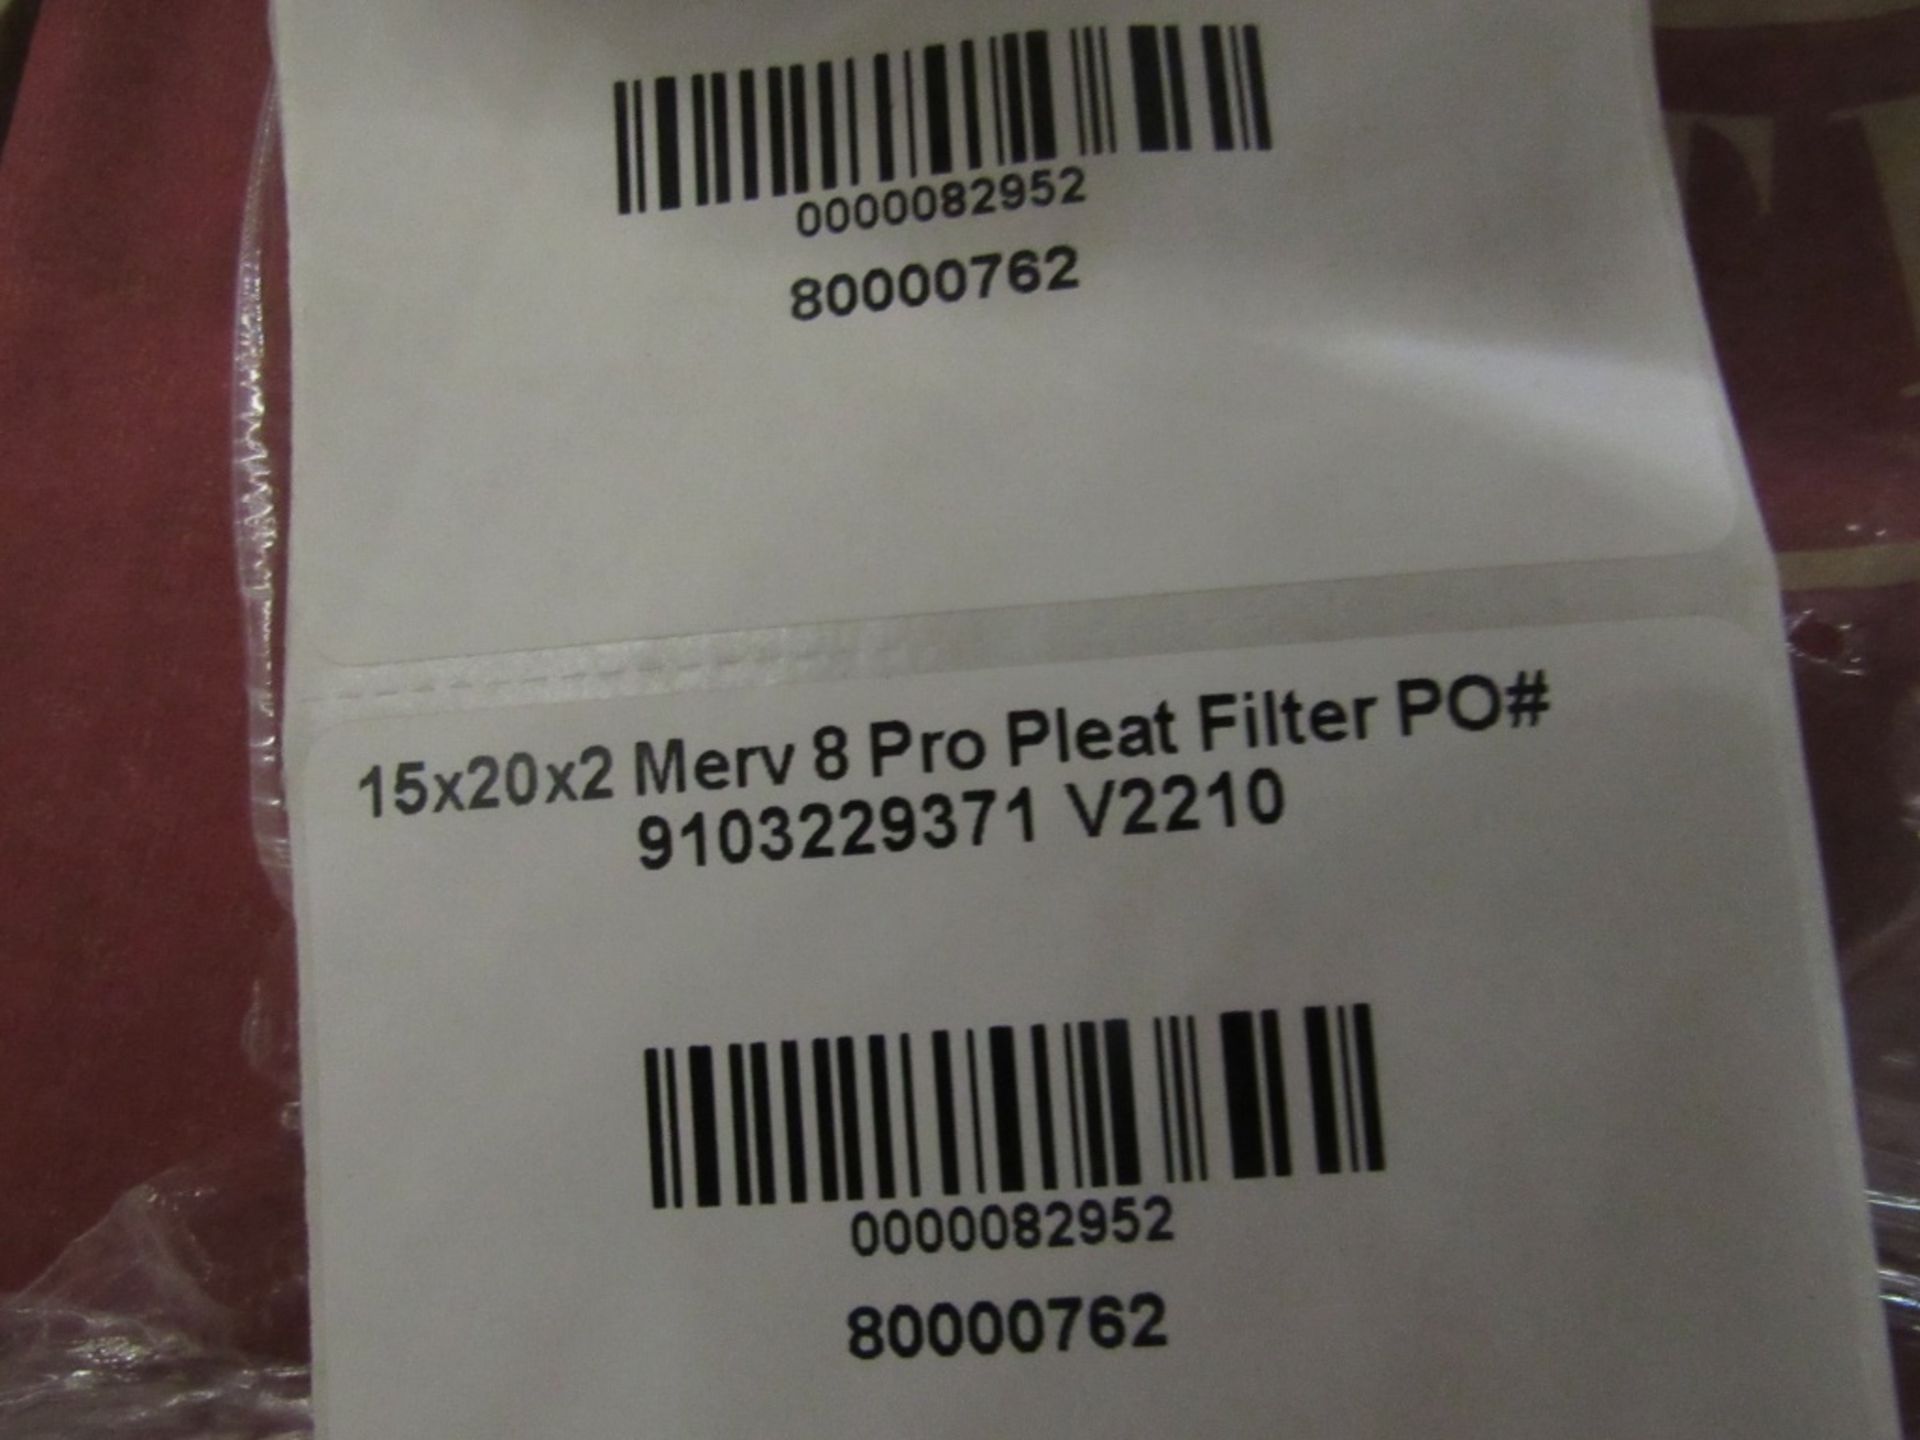 (approx qty - 80) Filters- ***Located in Cleveland, TN*** MFR - Pro Pleat 15" x 20" x 2" - Image 6 of 6